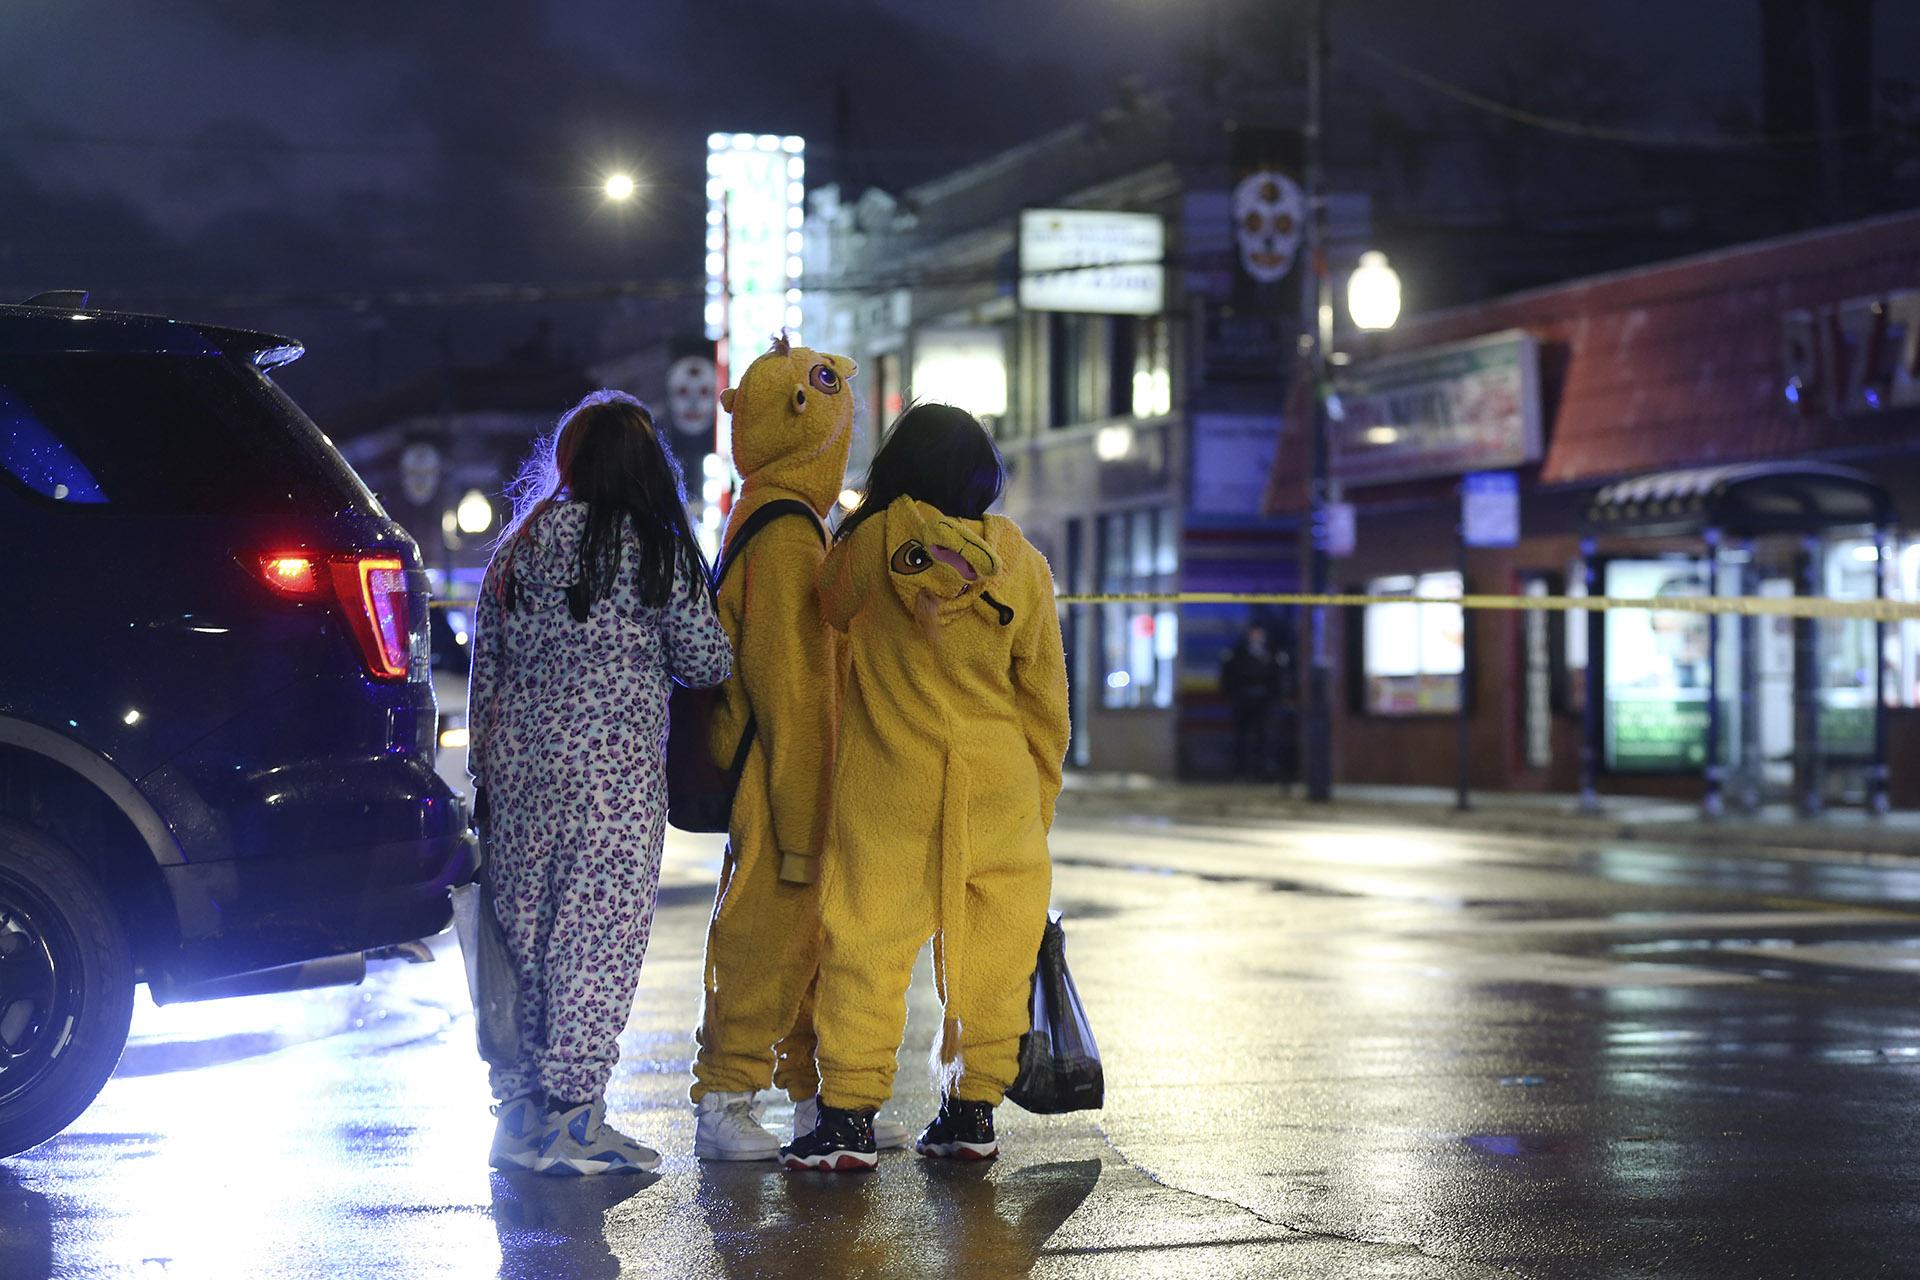 A group of children view a crime scene, where a 7-year-old girl was shot while trick-or-treating Thursday, Oct. 31, 2019, in Chicago. (John J. Kim / Chicago Tribune via AP)